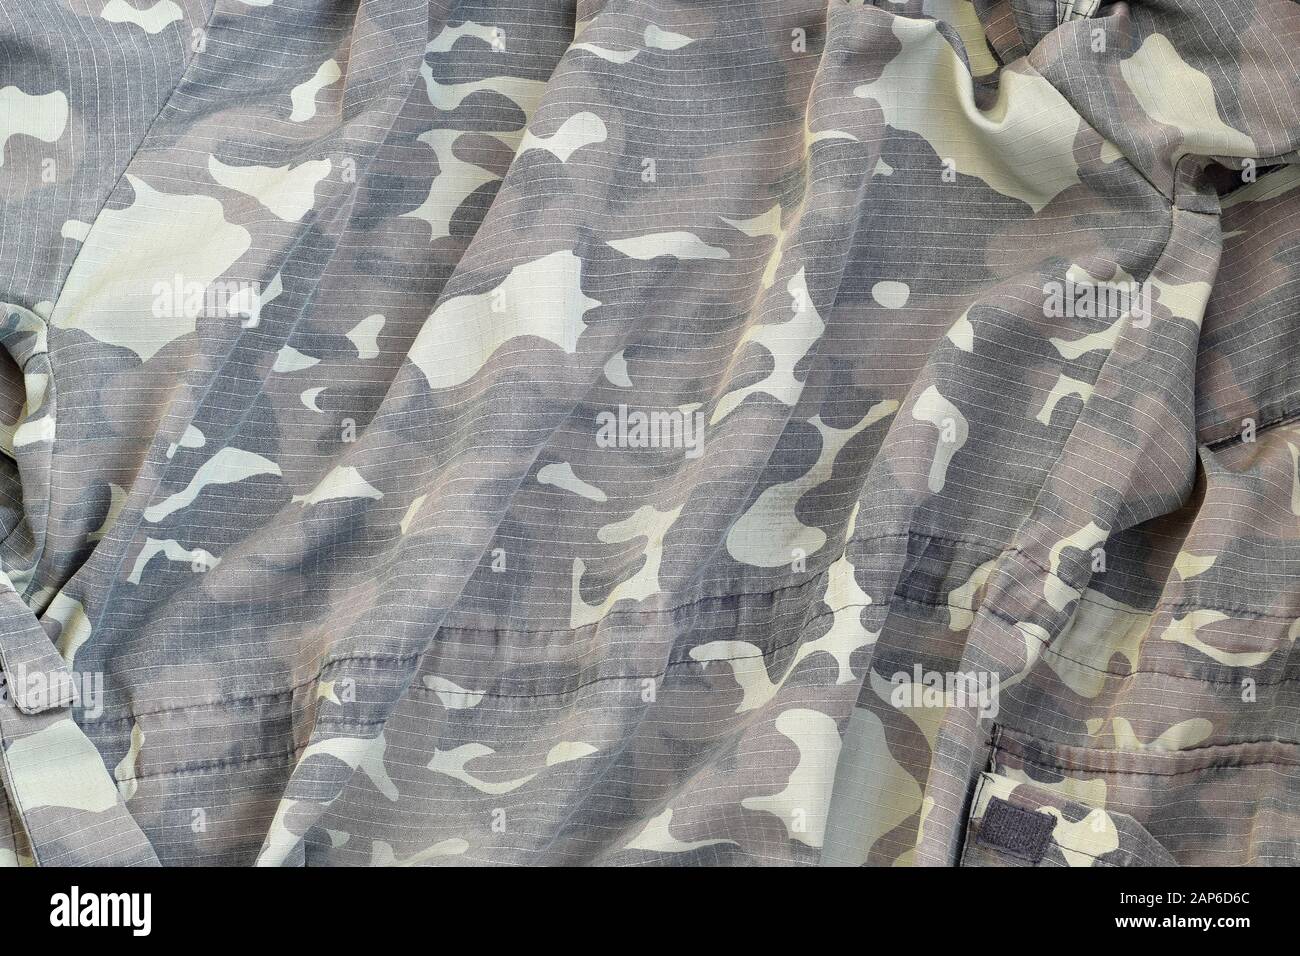 Camouflage Wallpaper Khaki Green Black Army Soldier Bedroom Military Camo